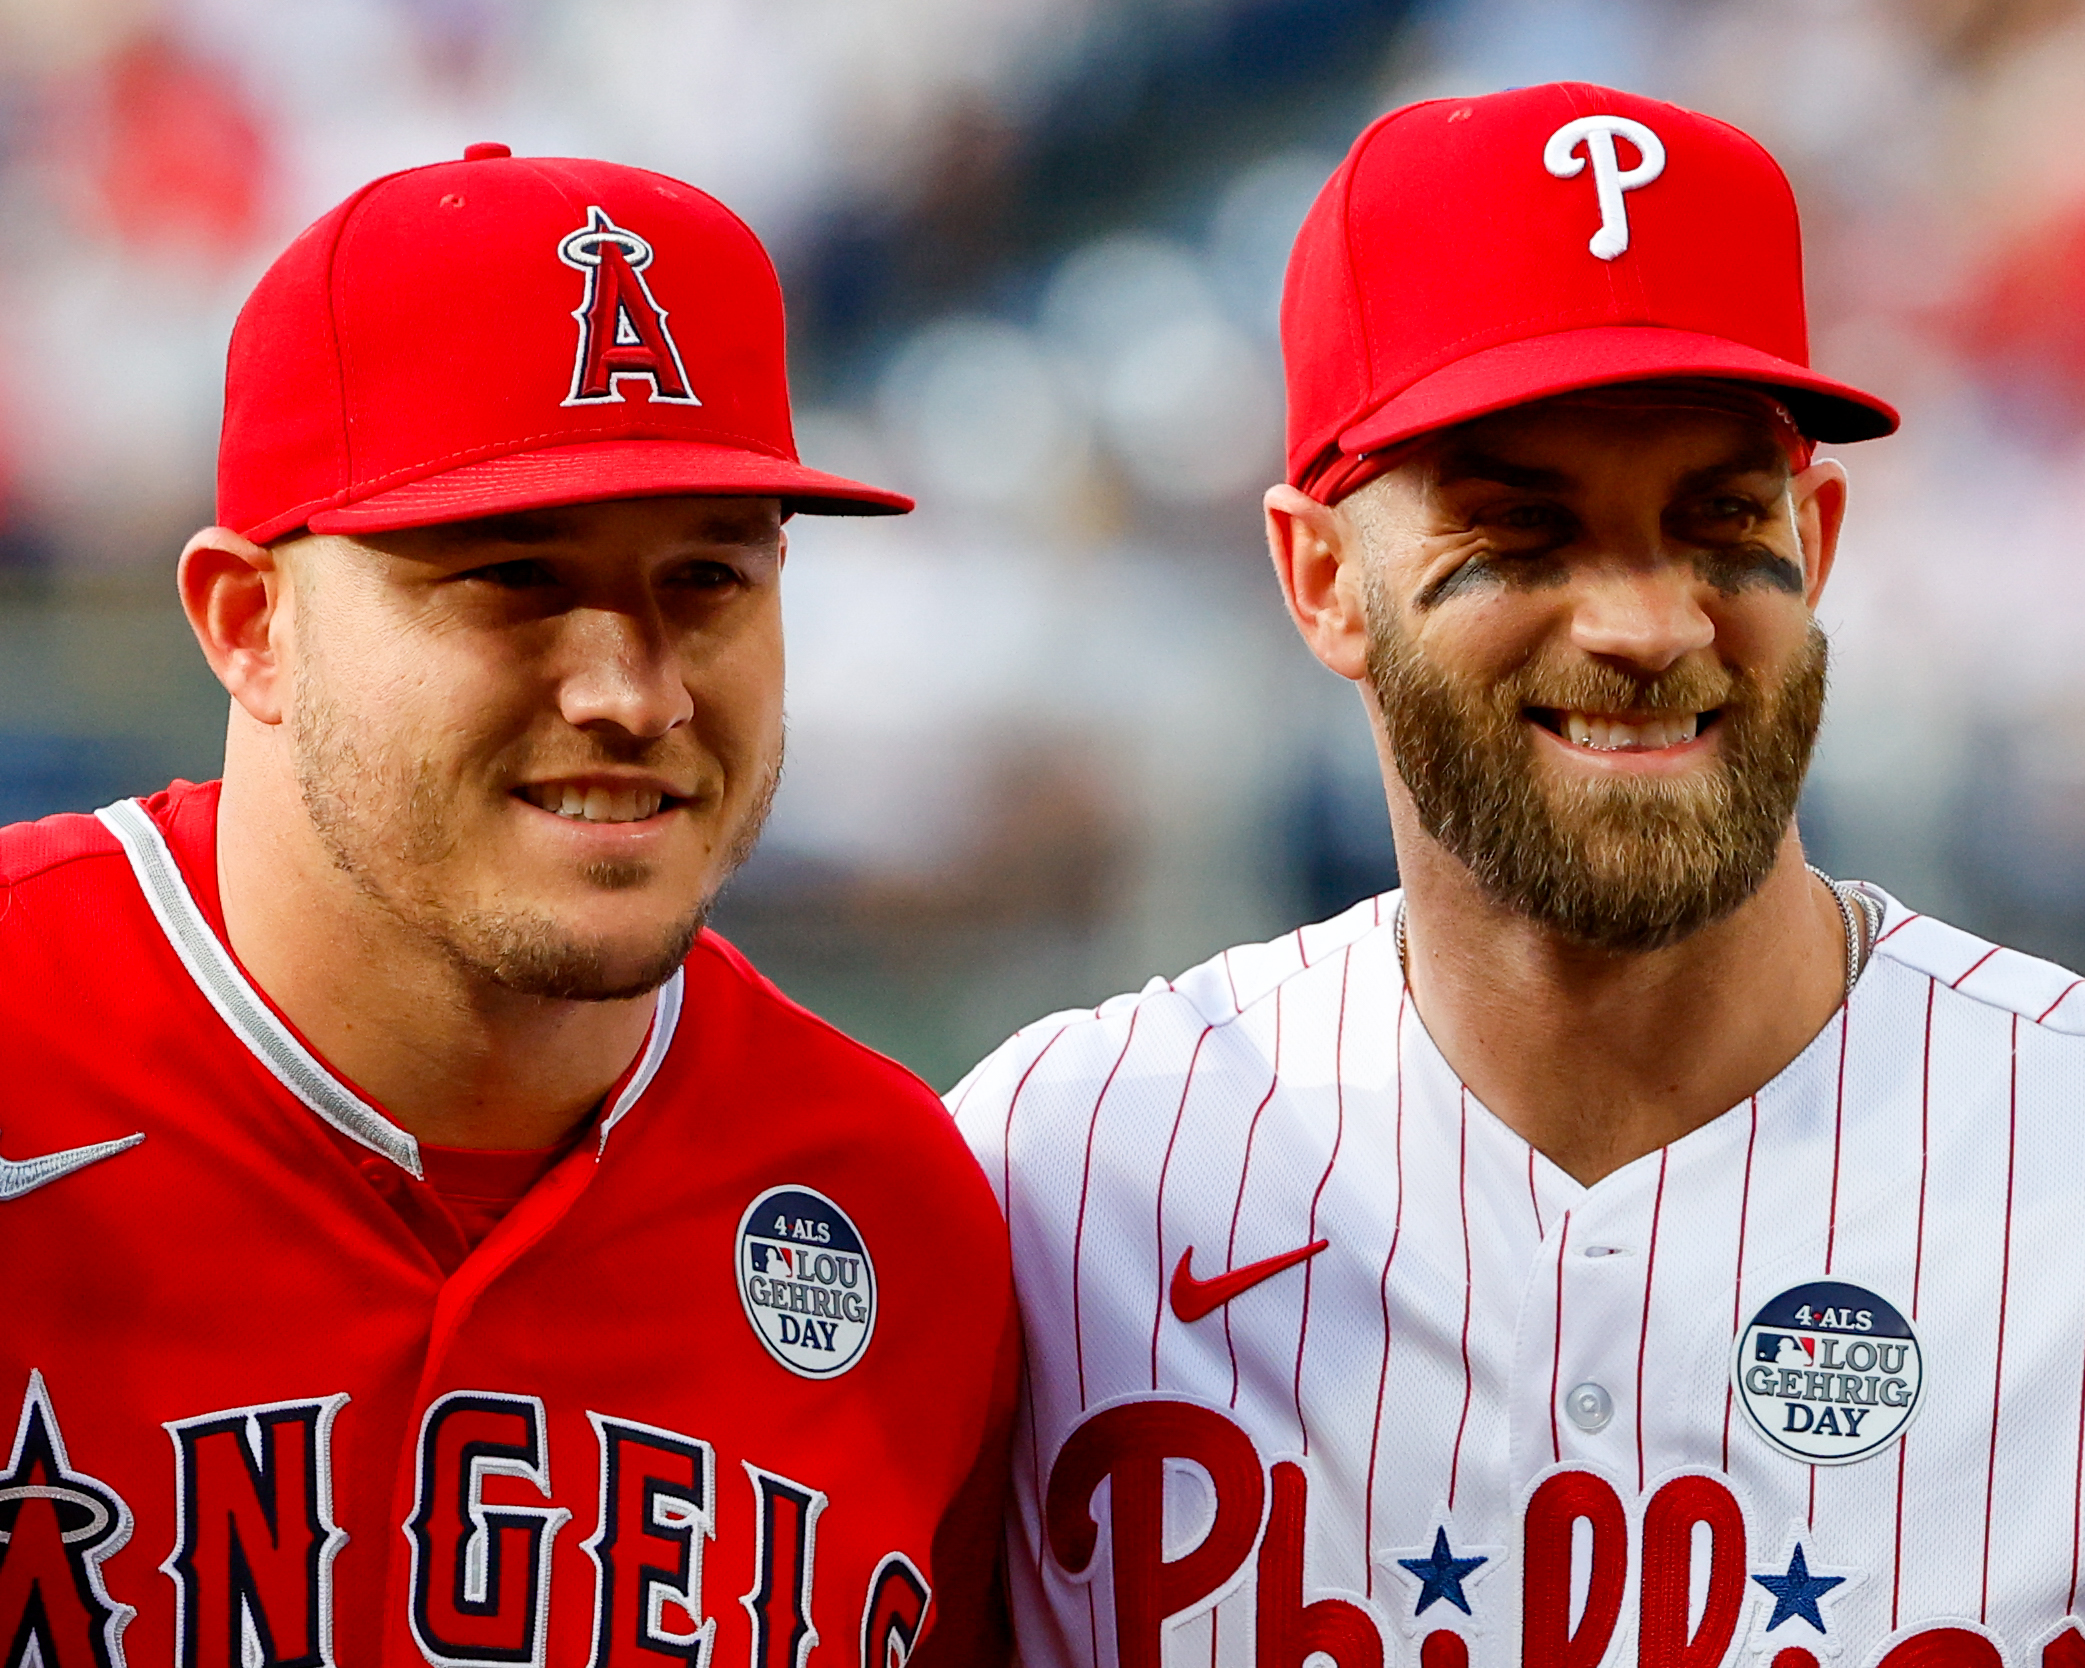 Phillies' Bryce Harper Gets World Series Moment, NJ's Mike Trout's